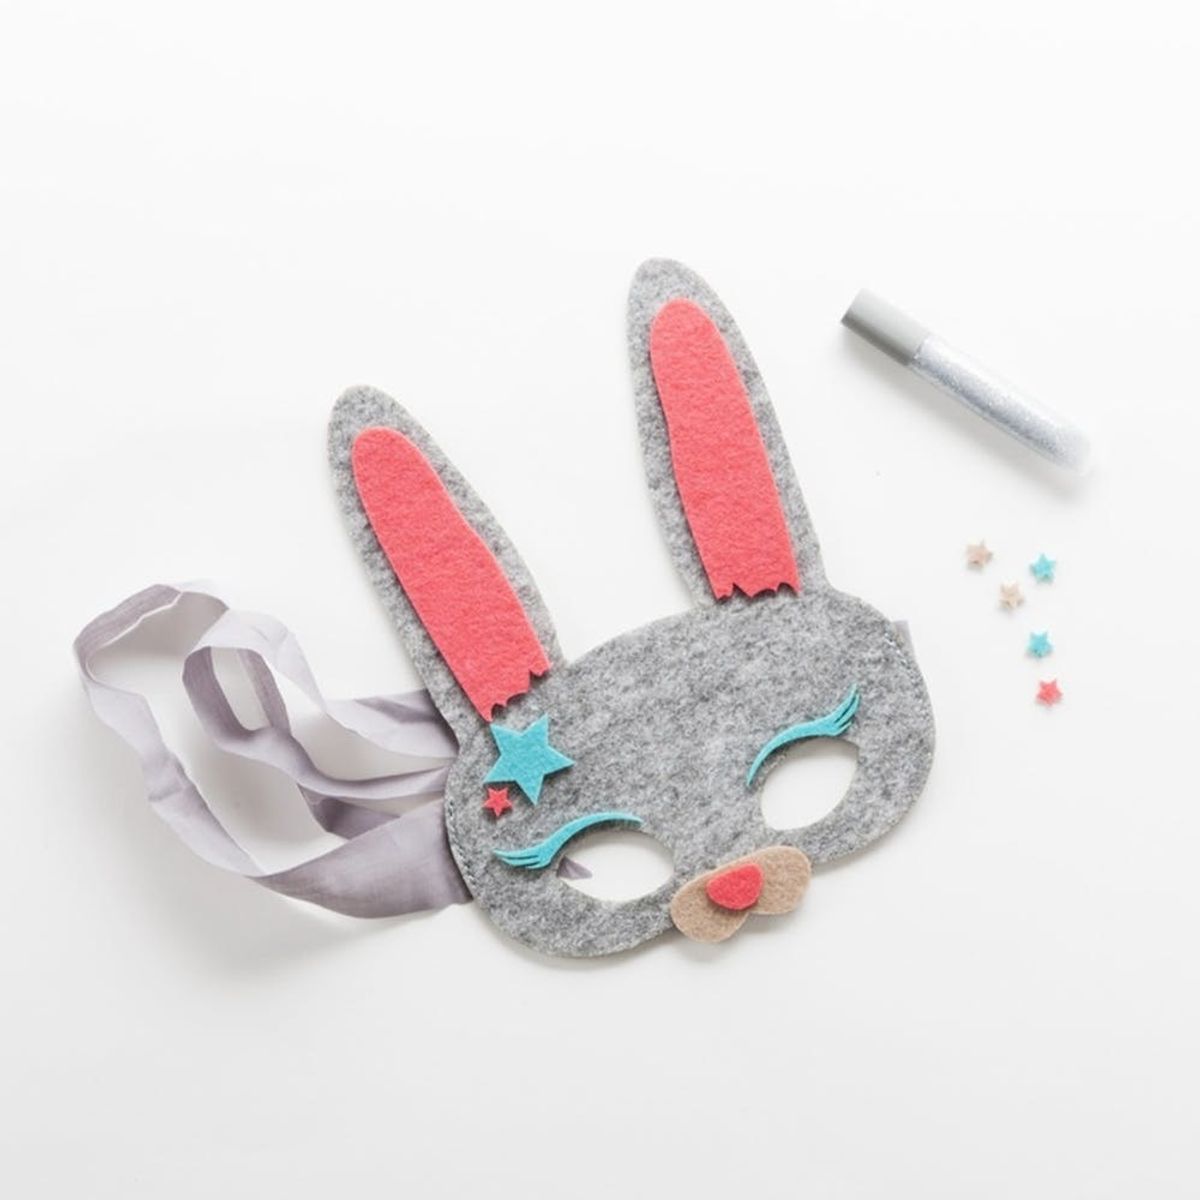 8 DIY Kits That Will Keep the Kids Entertained on Easter